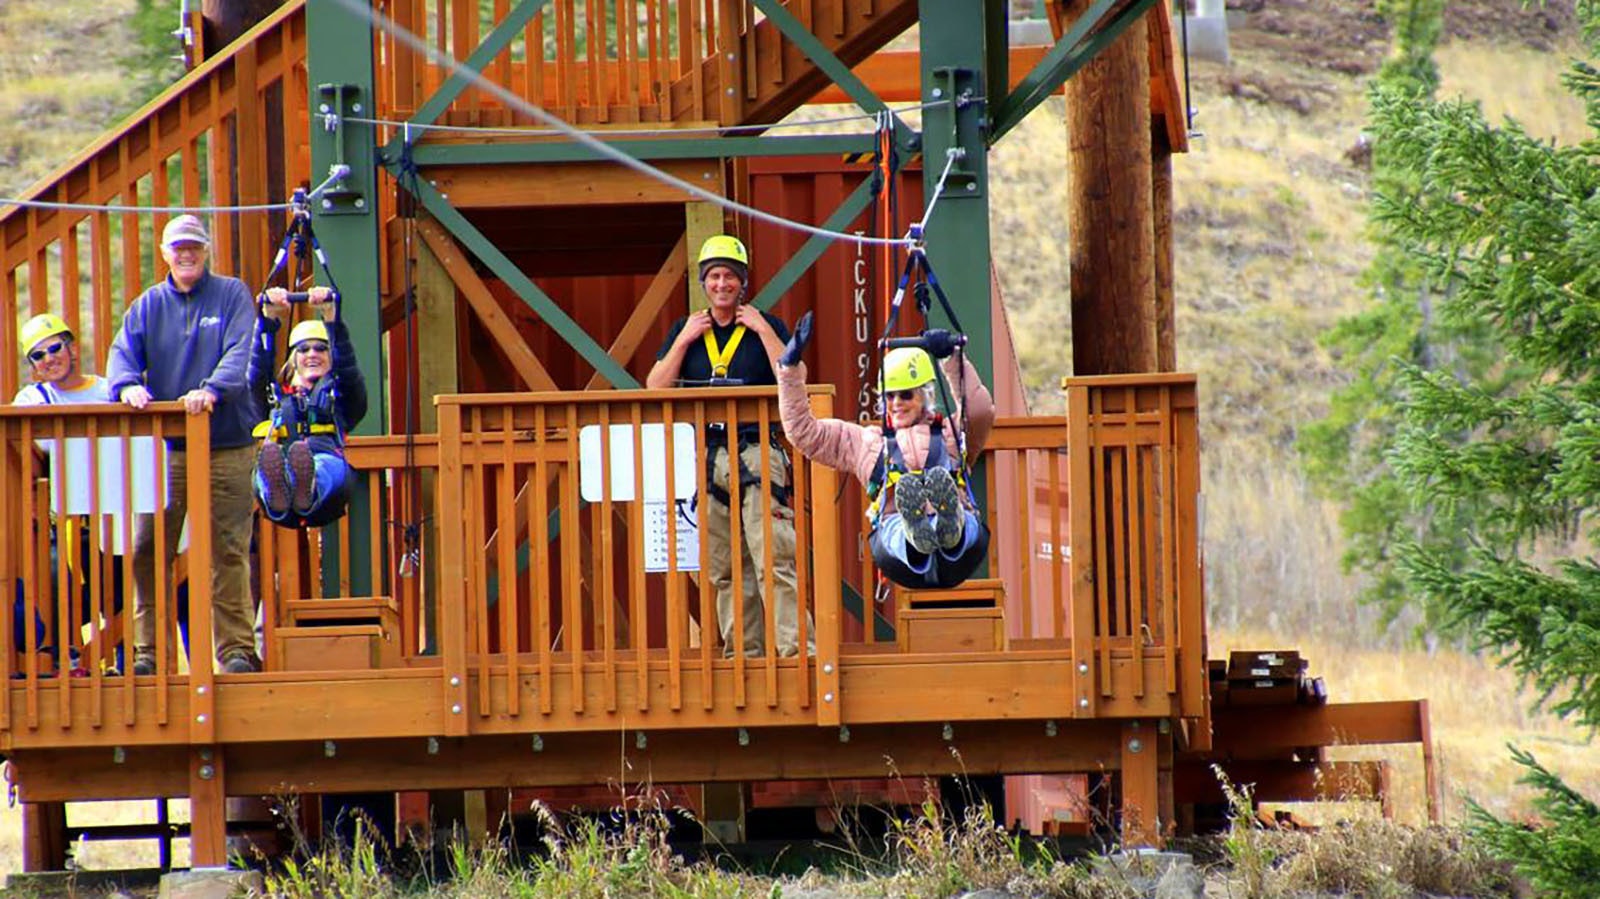 The Sleeping Giant zipline won't open this summer as the resort works to repair damage done by spring snows.